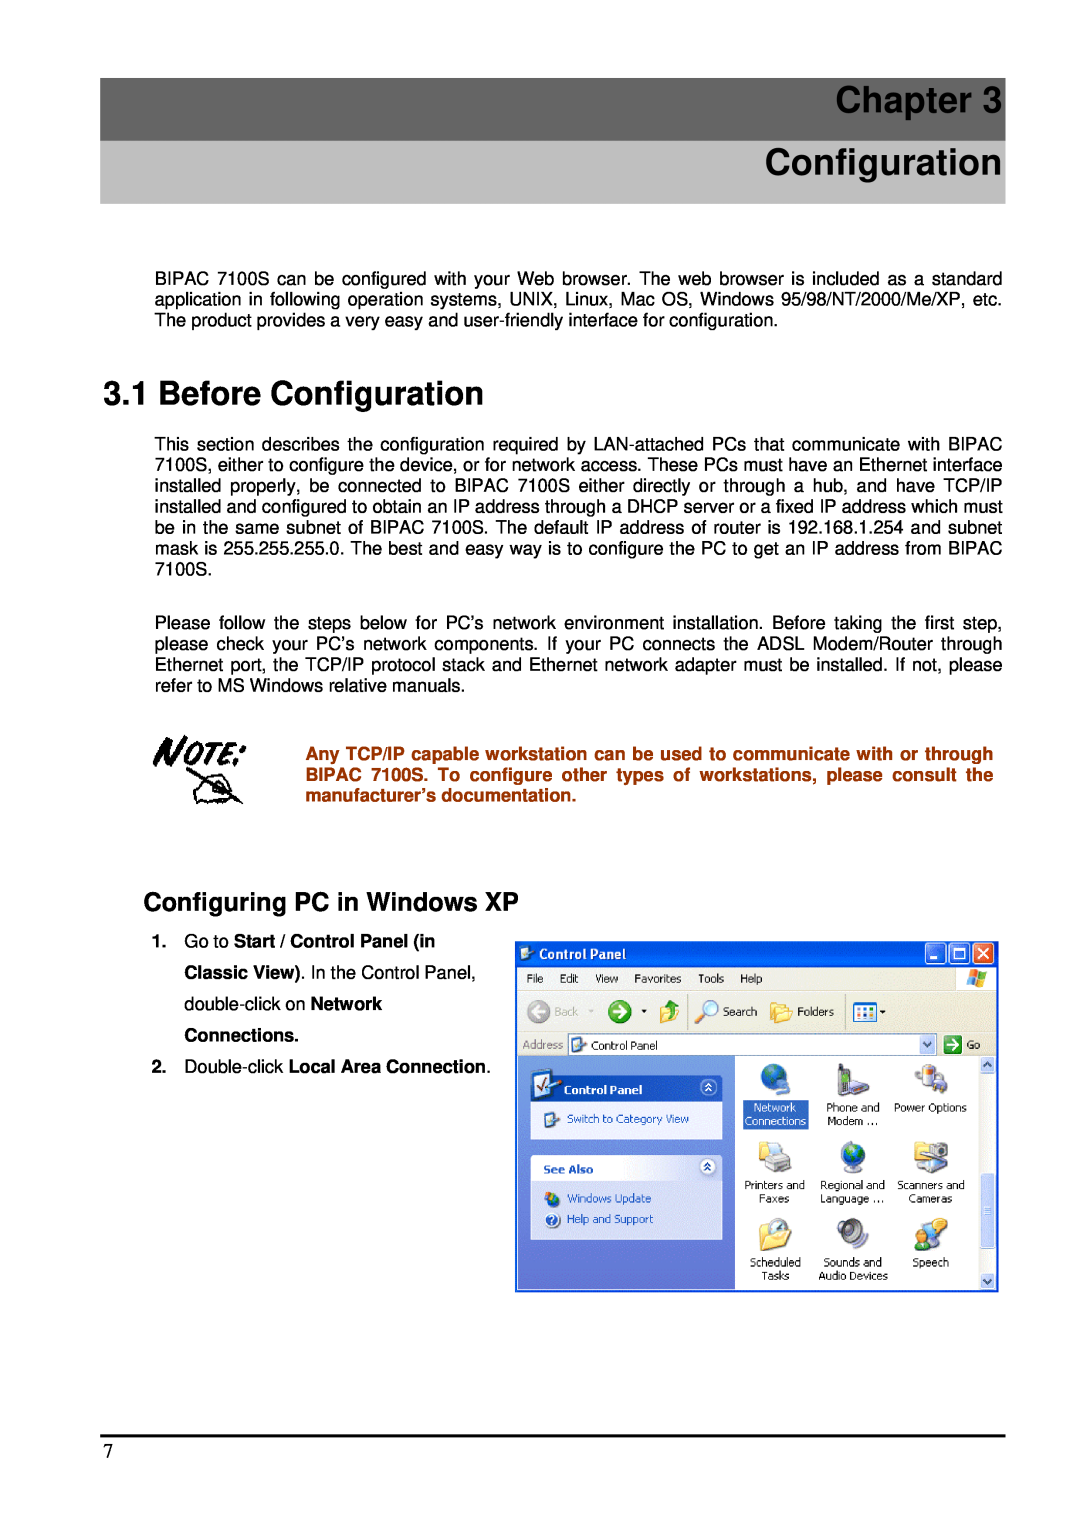 Billion Electric Company 7100S user manual Chapter Configuration, Before Configuration, Configuring PC in Windows XP 